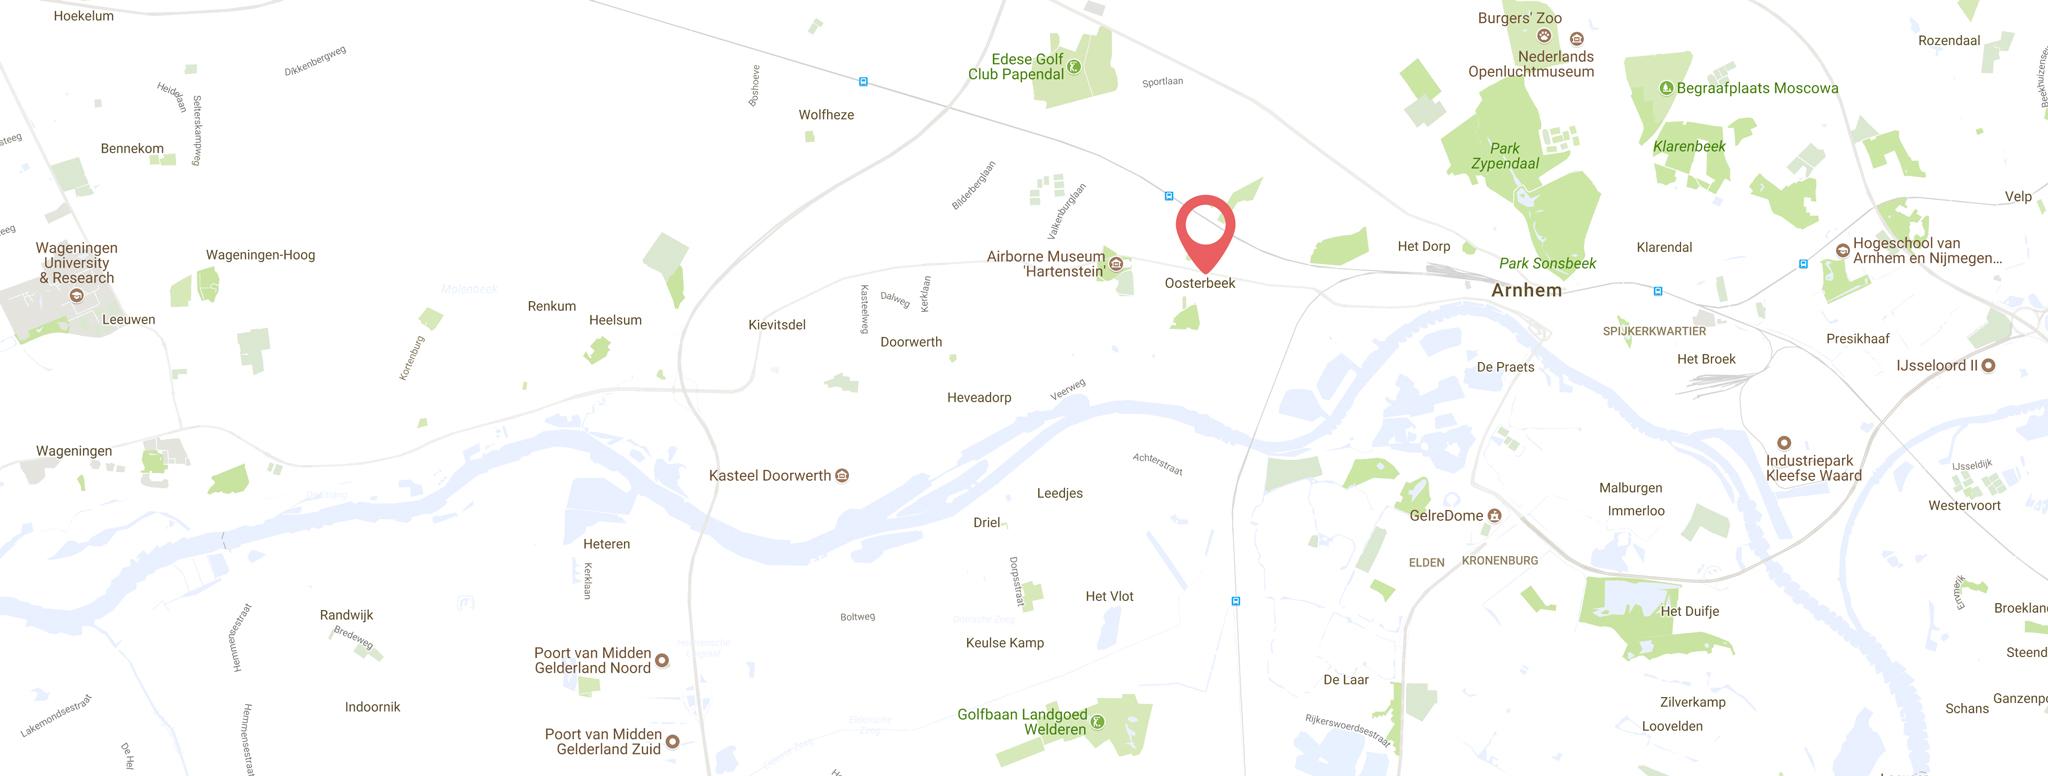 Oosterbeek on the map